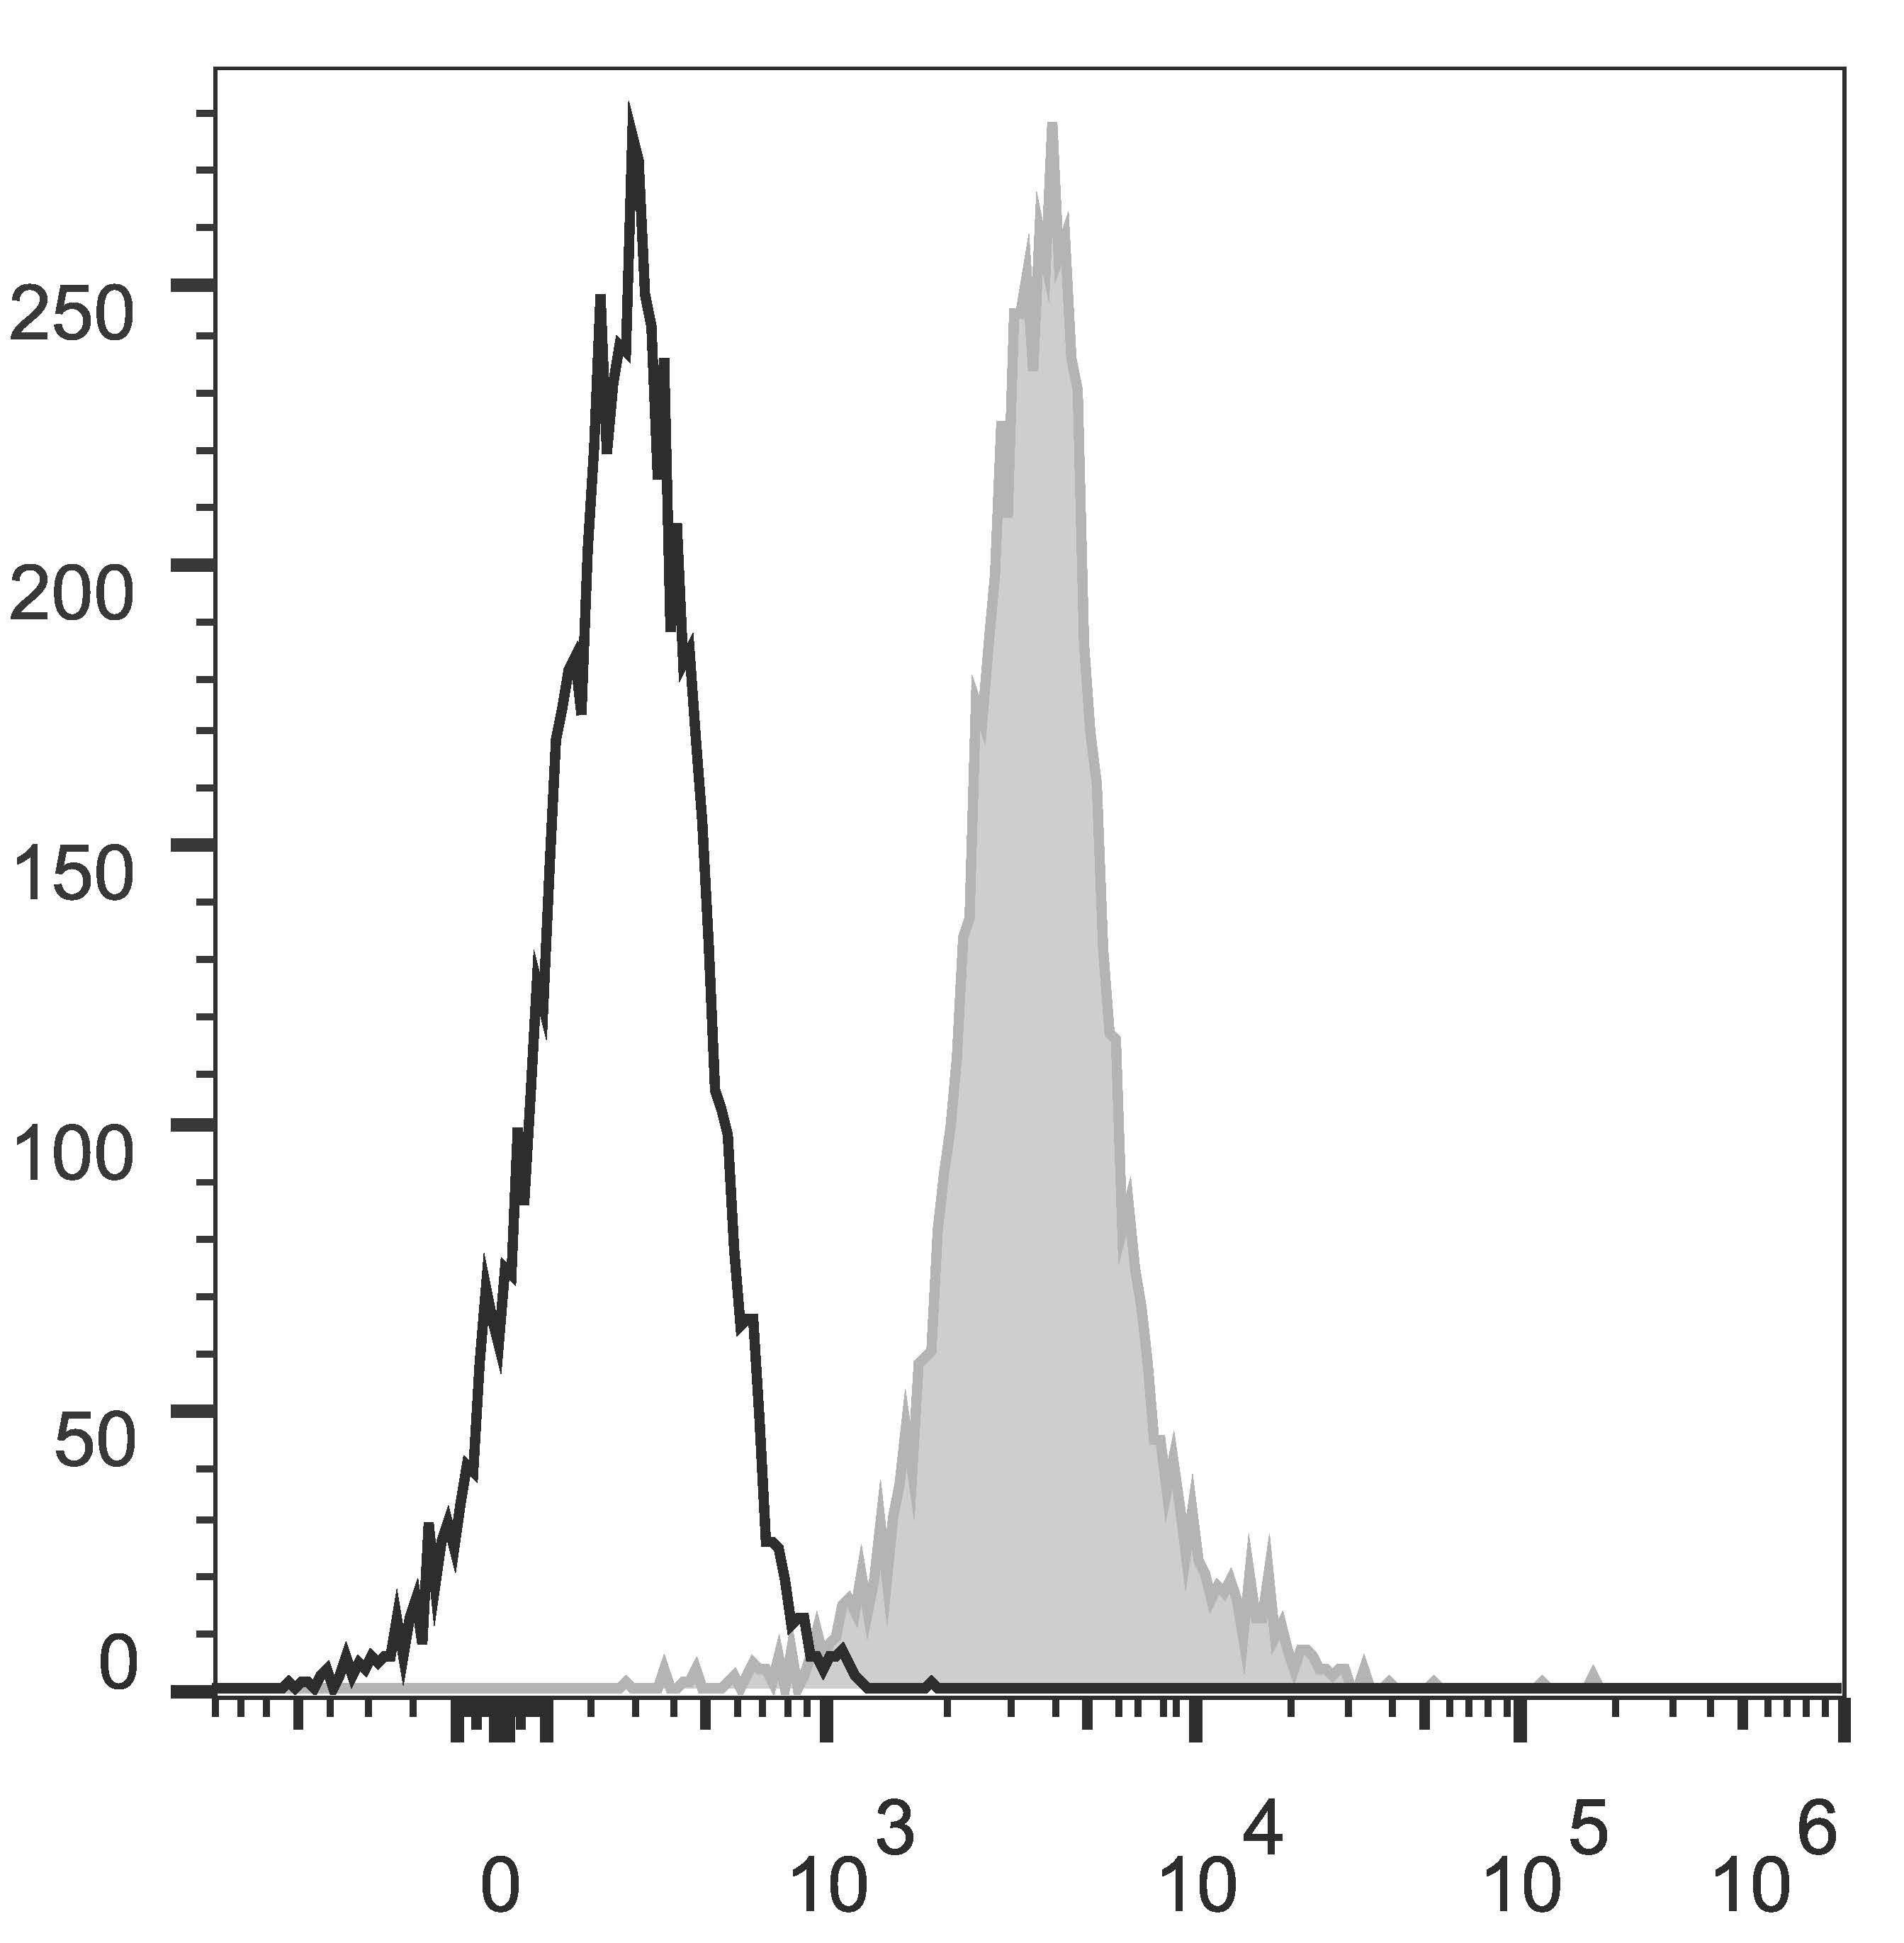 C57BL/6 murine splenocytes are stained with Anti-Mouse PD-L1 Monoclonal Antibody(PE Conjugated)[Used at 0.05 μg/10<sup>6</sup> cells dilution](filled gray histogram). Unstained splenocytes (empty black histogram) are used as control.